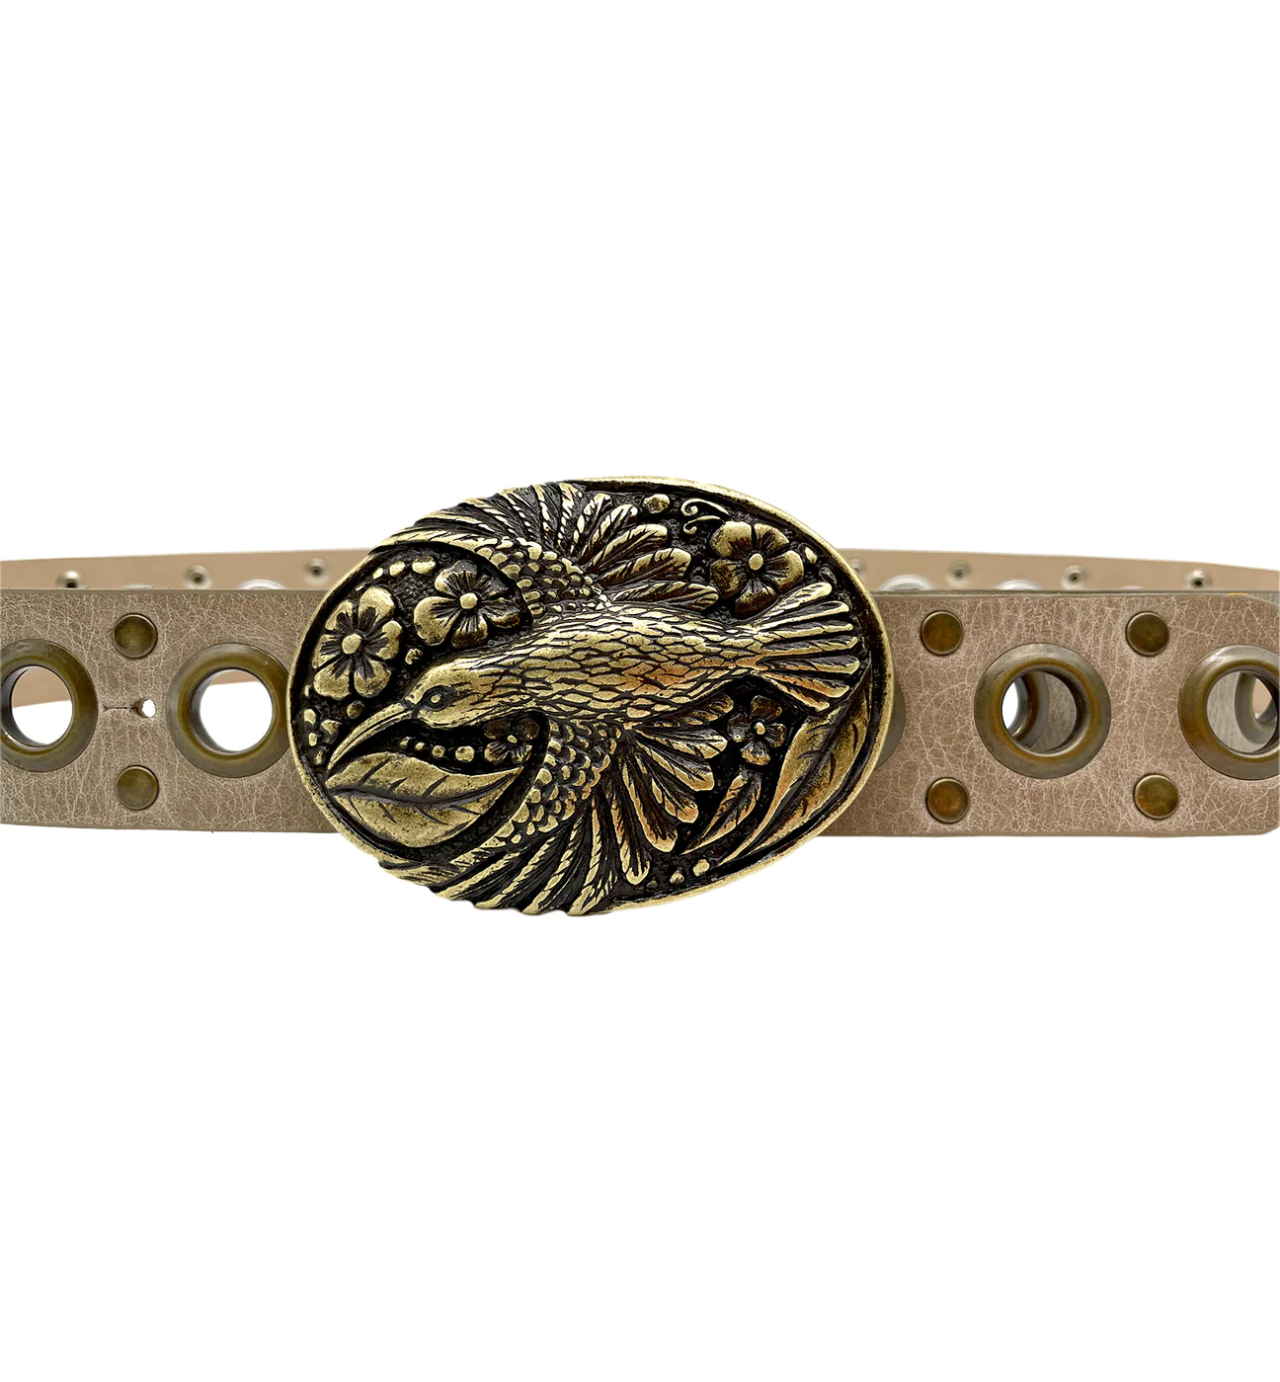 Leather belt with large bird buckle